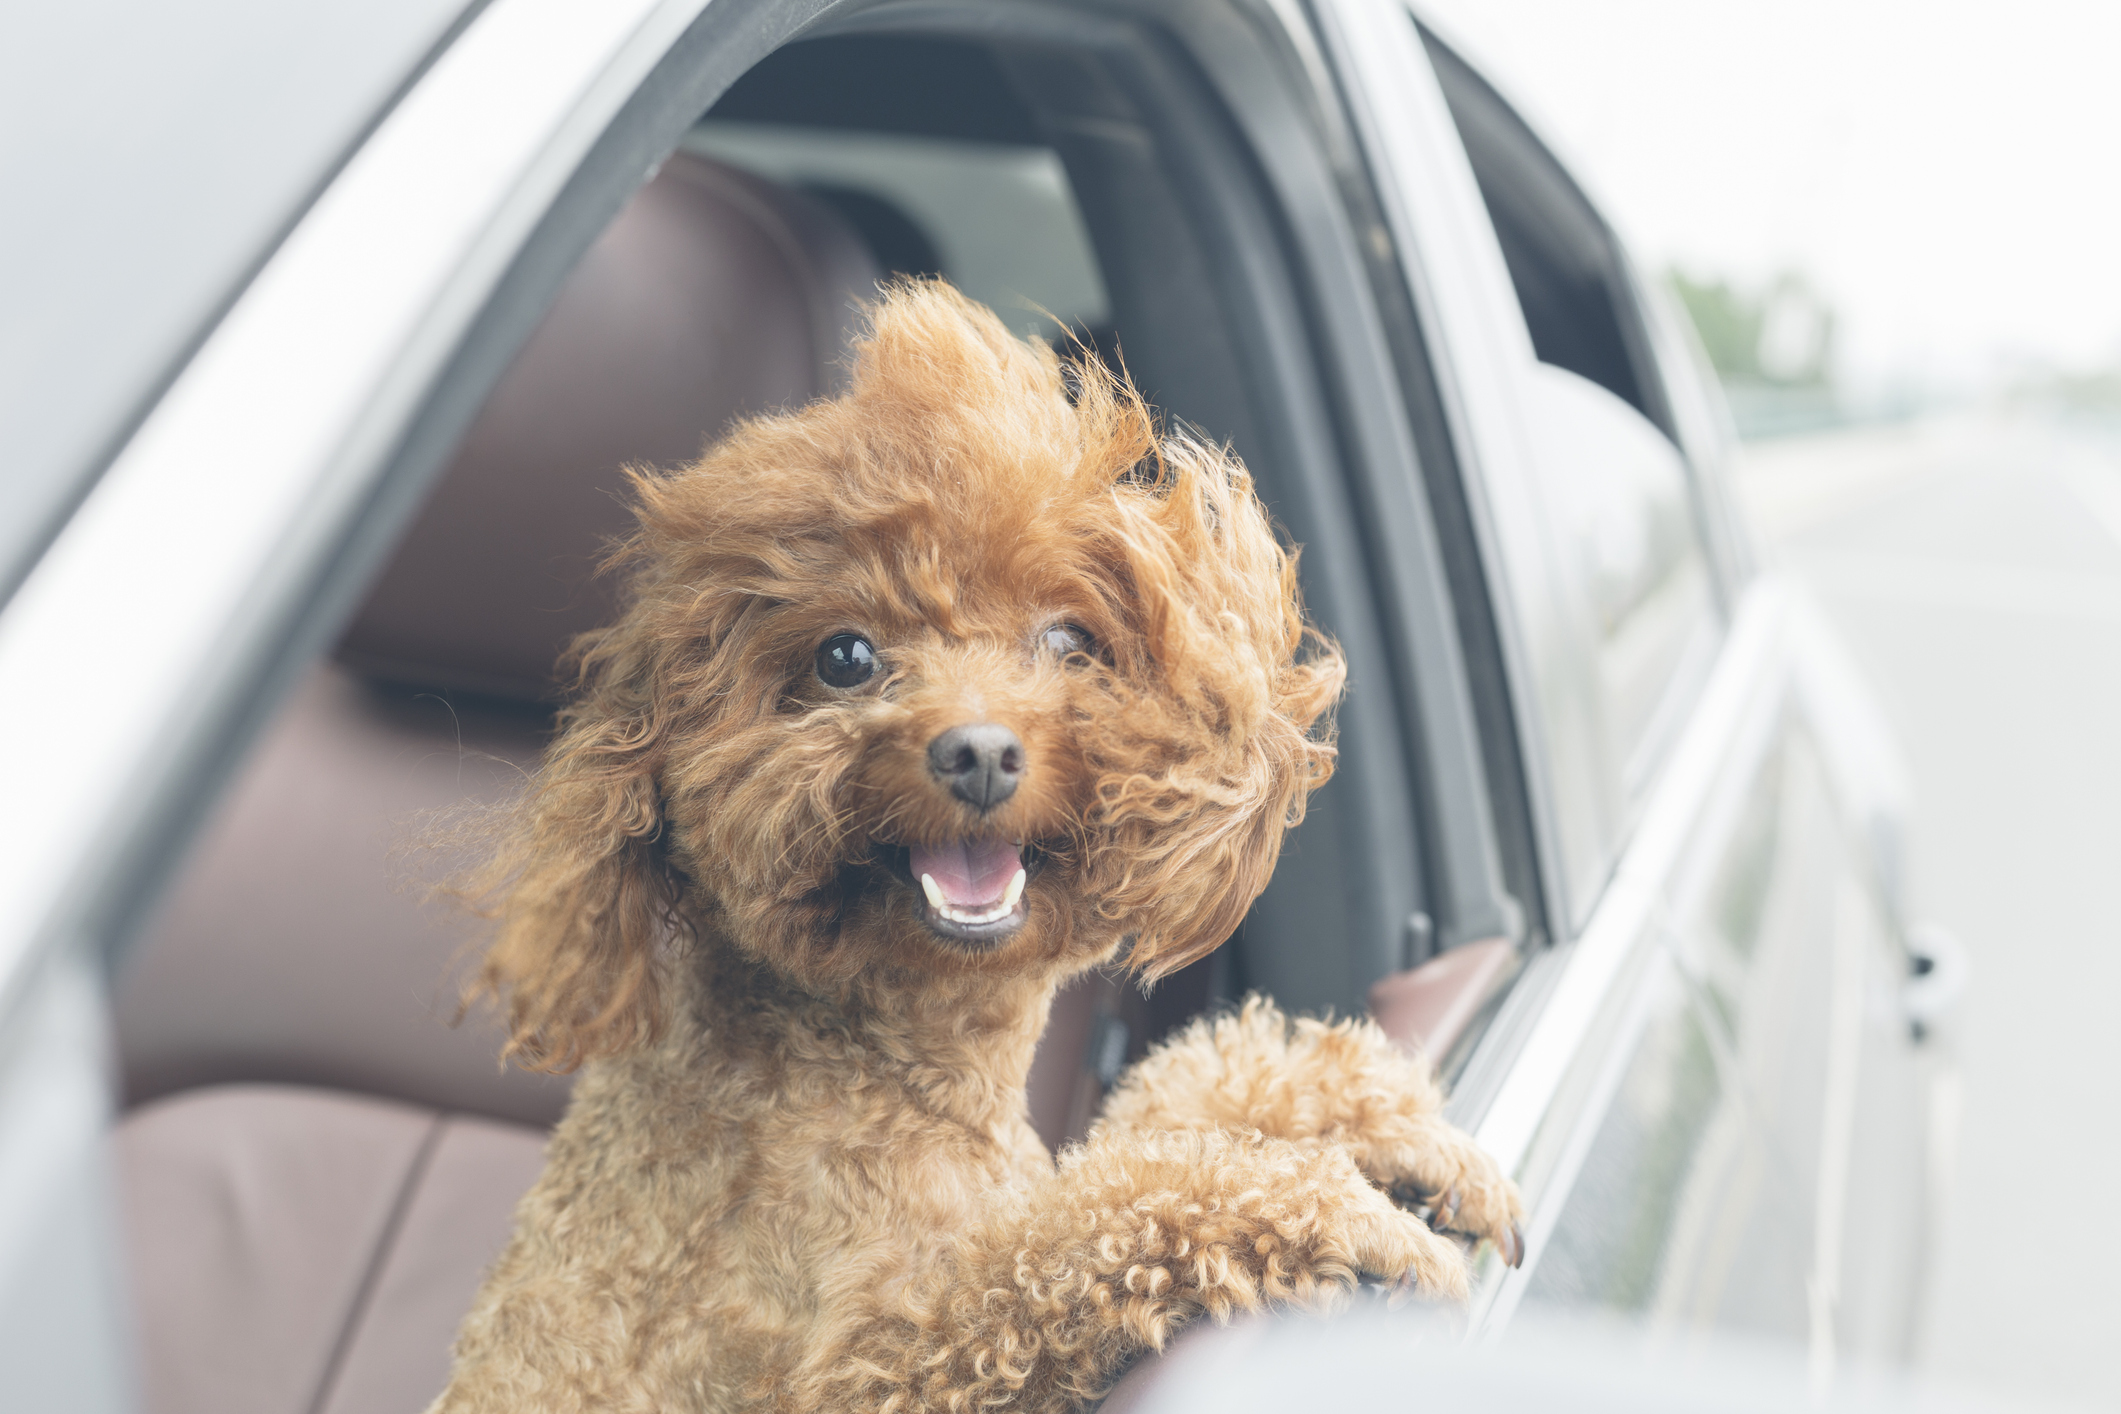 A cute poodle mix sticks his head out of car window